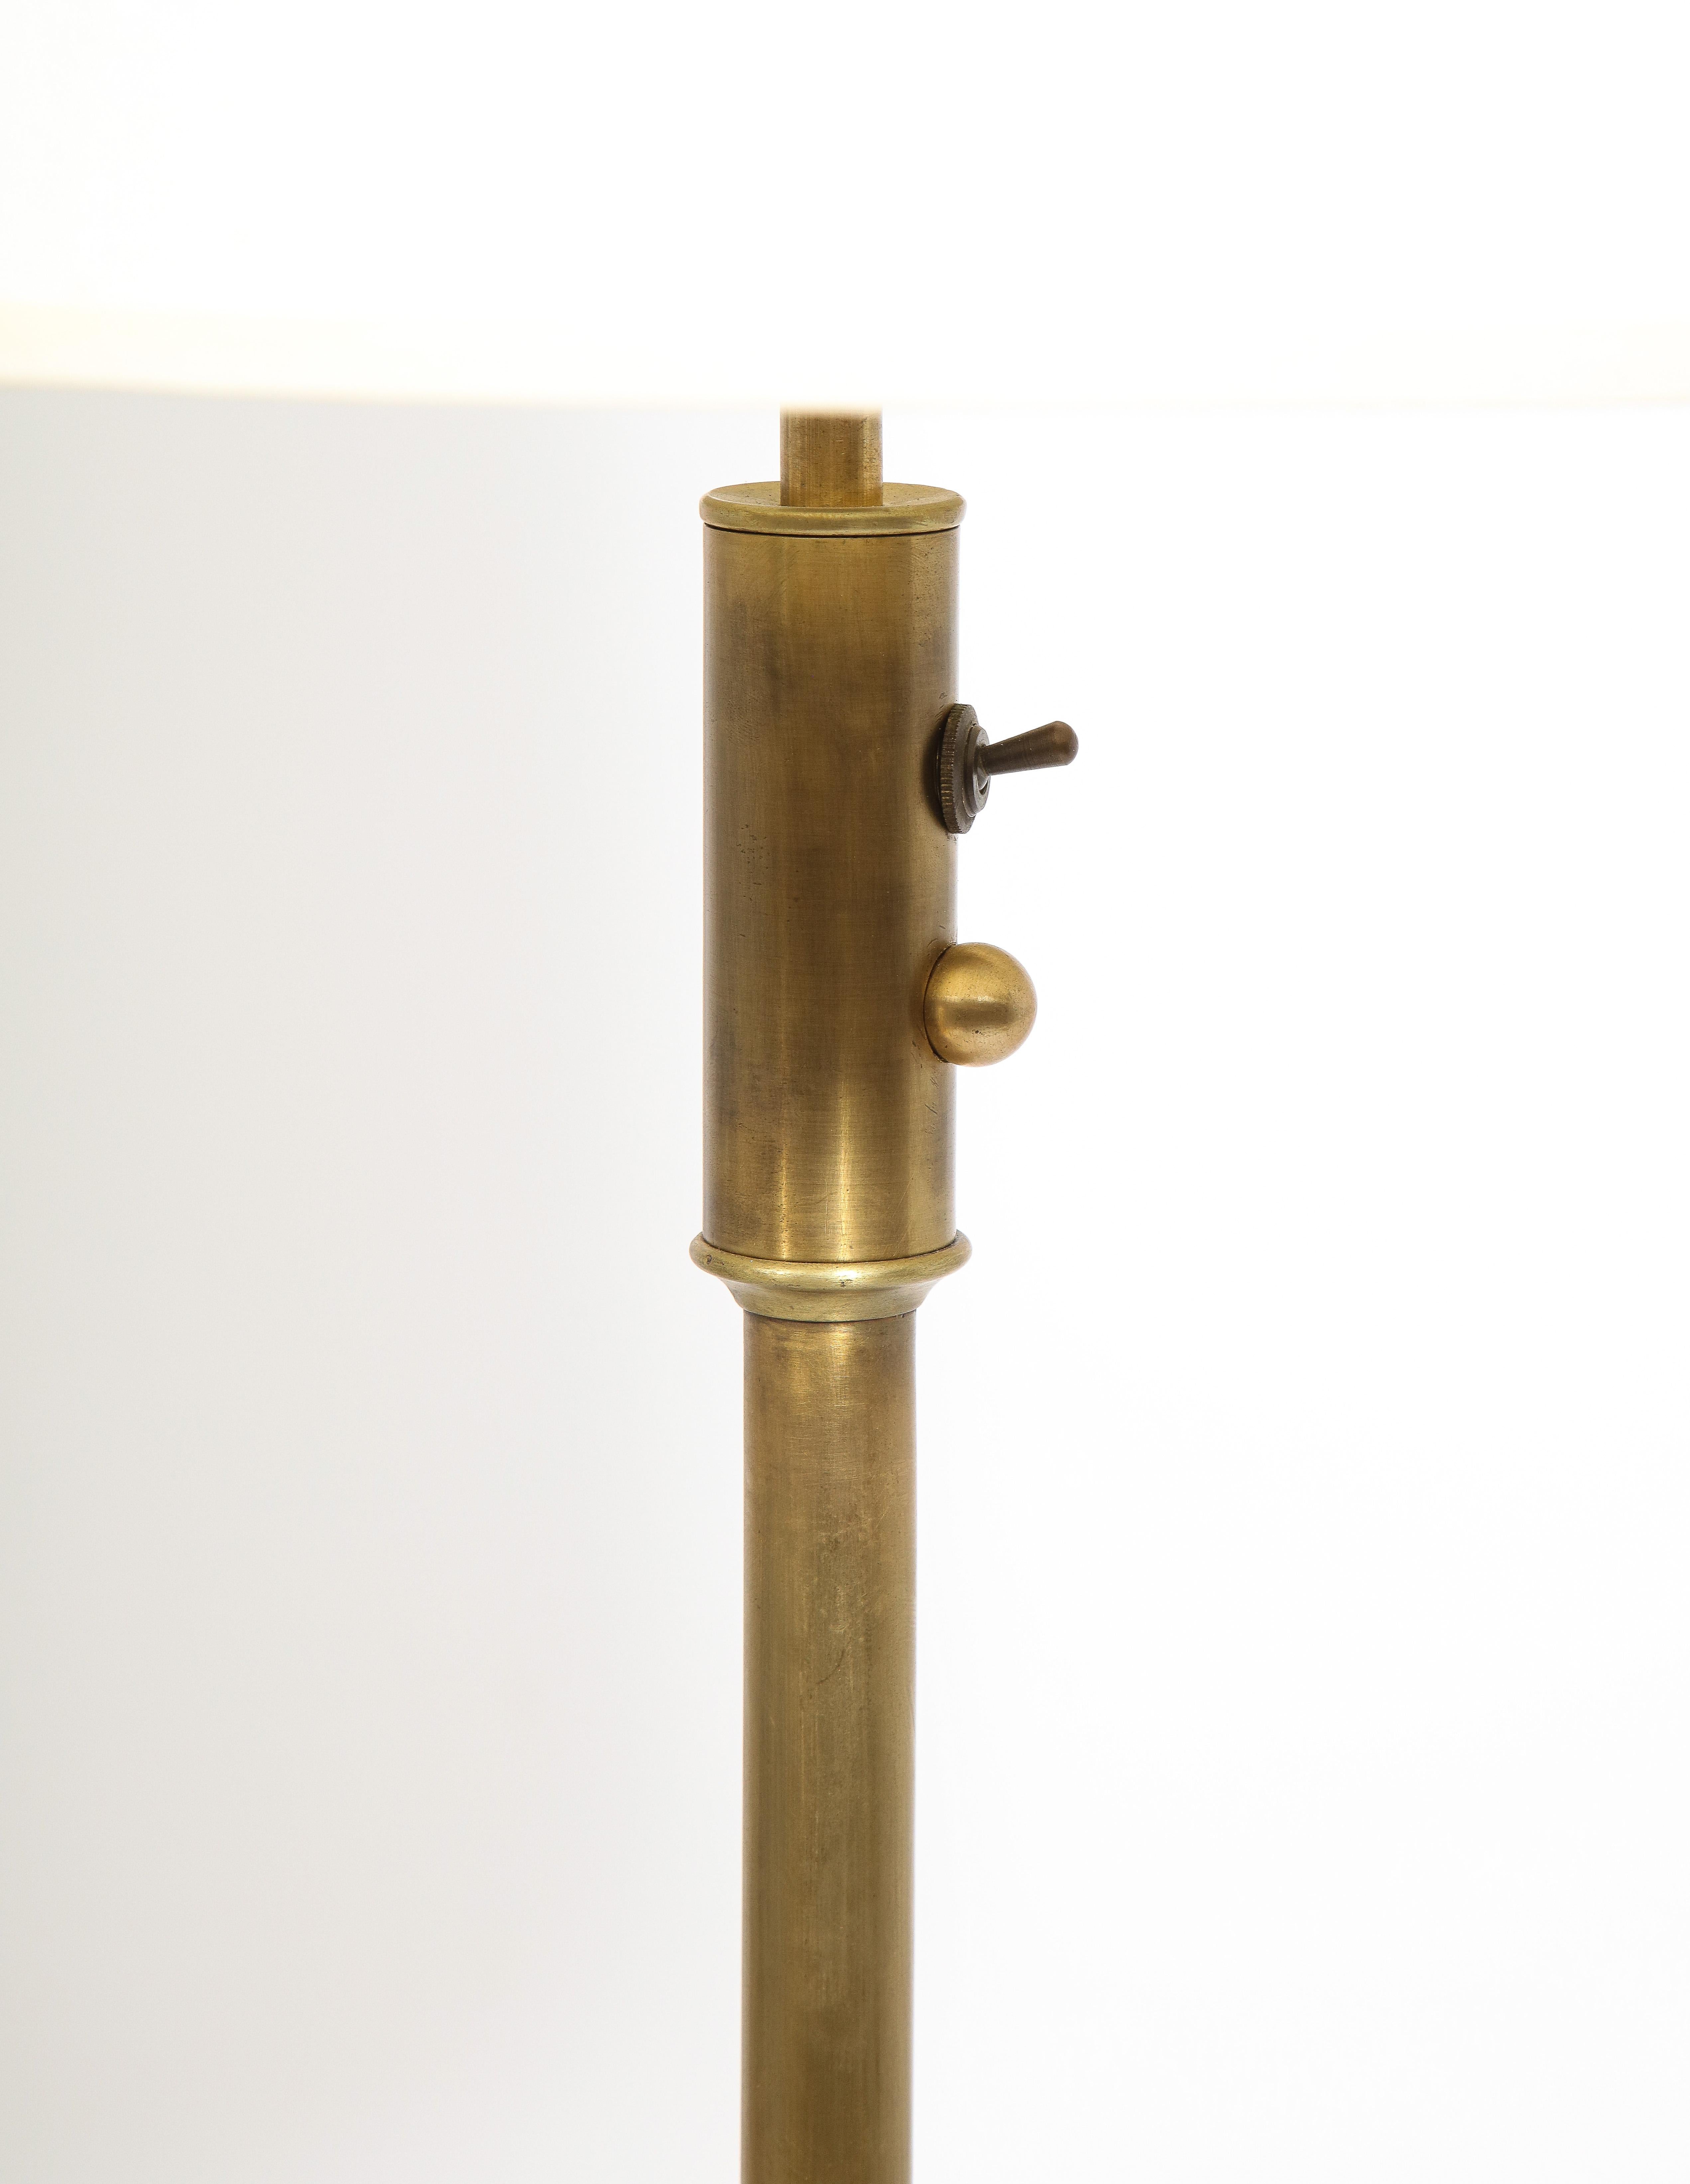 Pair of Brushed Brass Floor Lamps, France 1960's For Sale 1